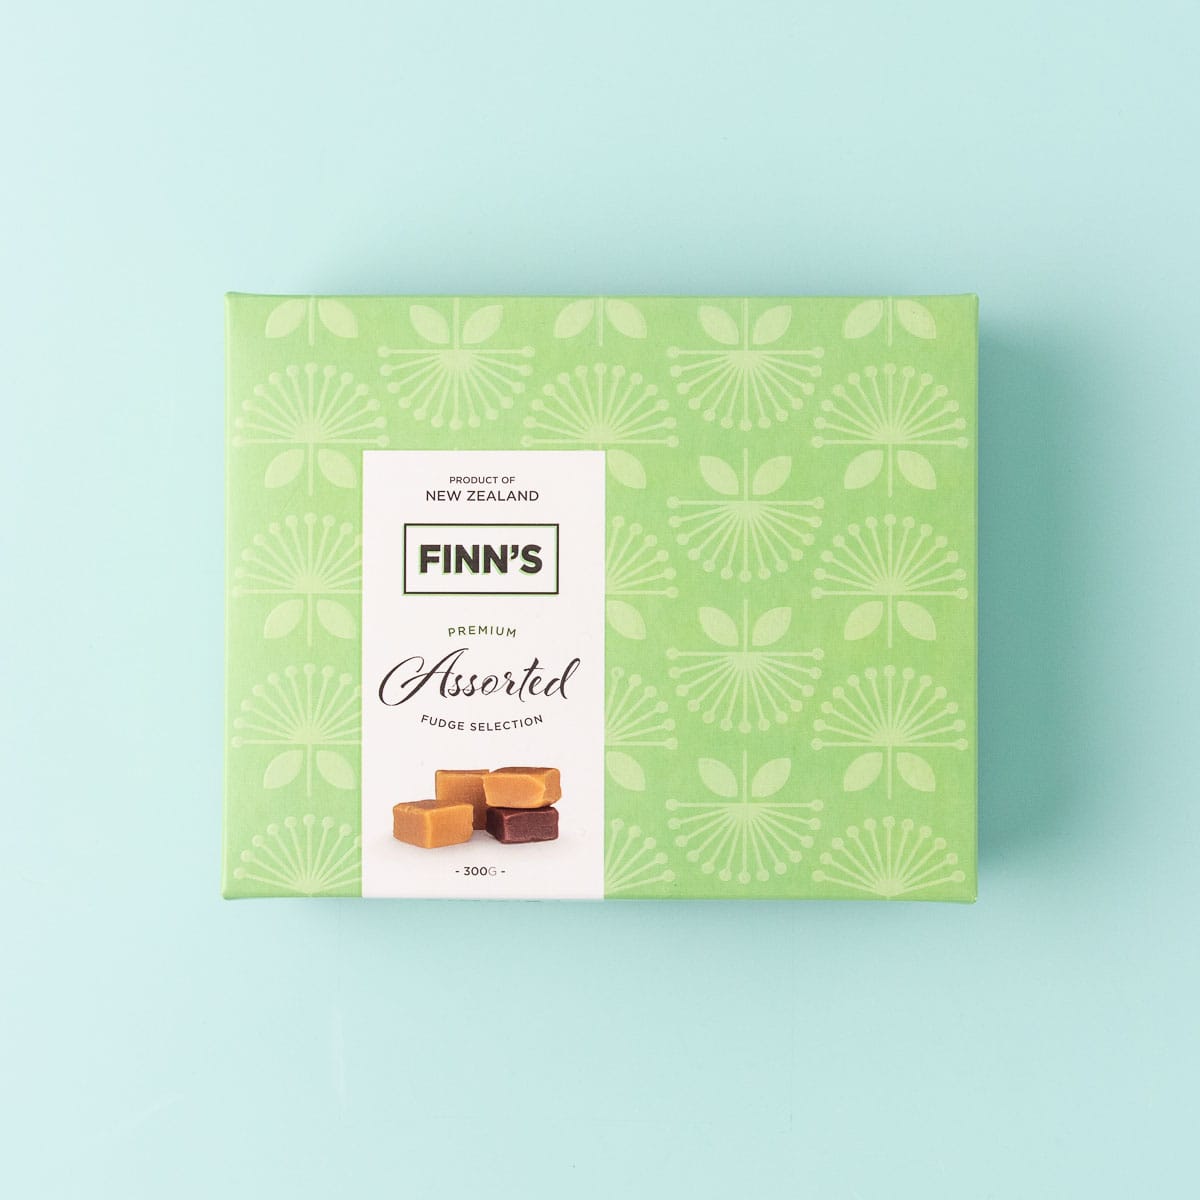 A light green box of Finn's Premium Assorted Fudge Selection, on a mint green background.